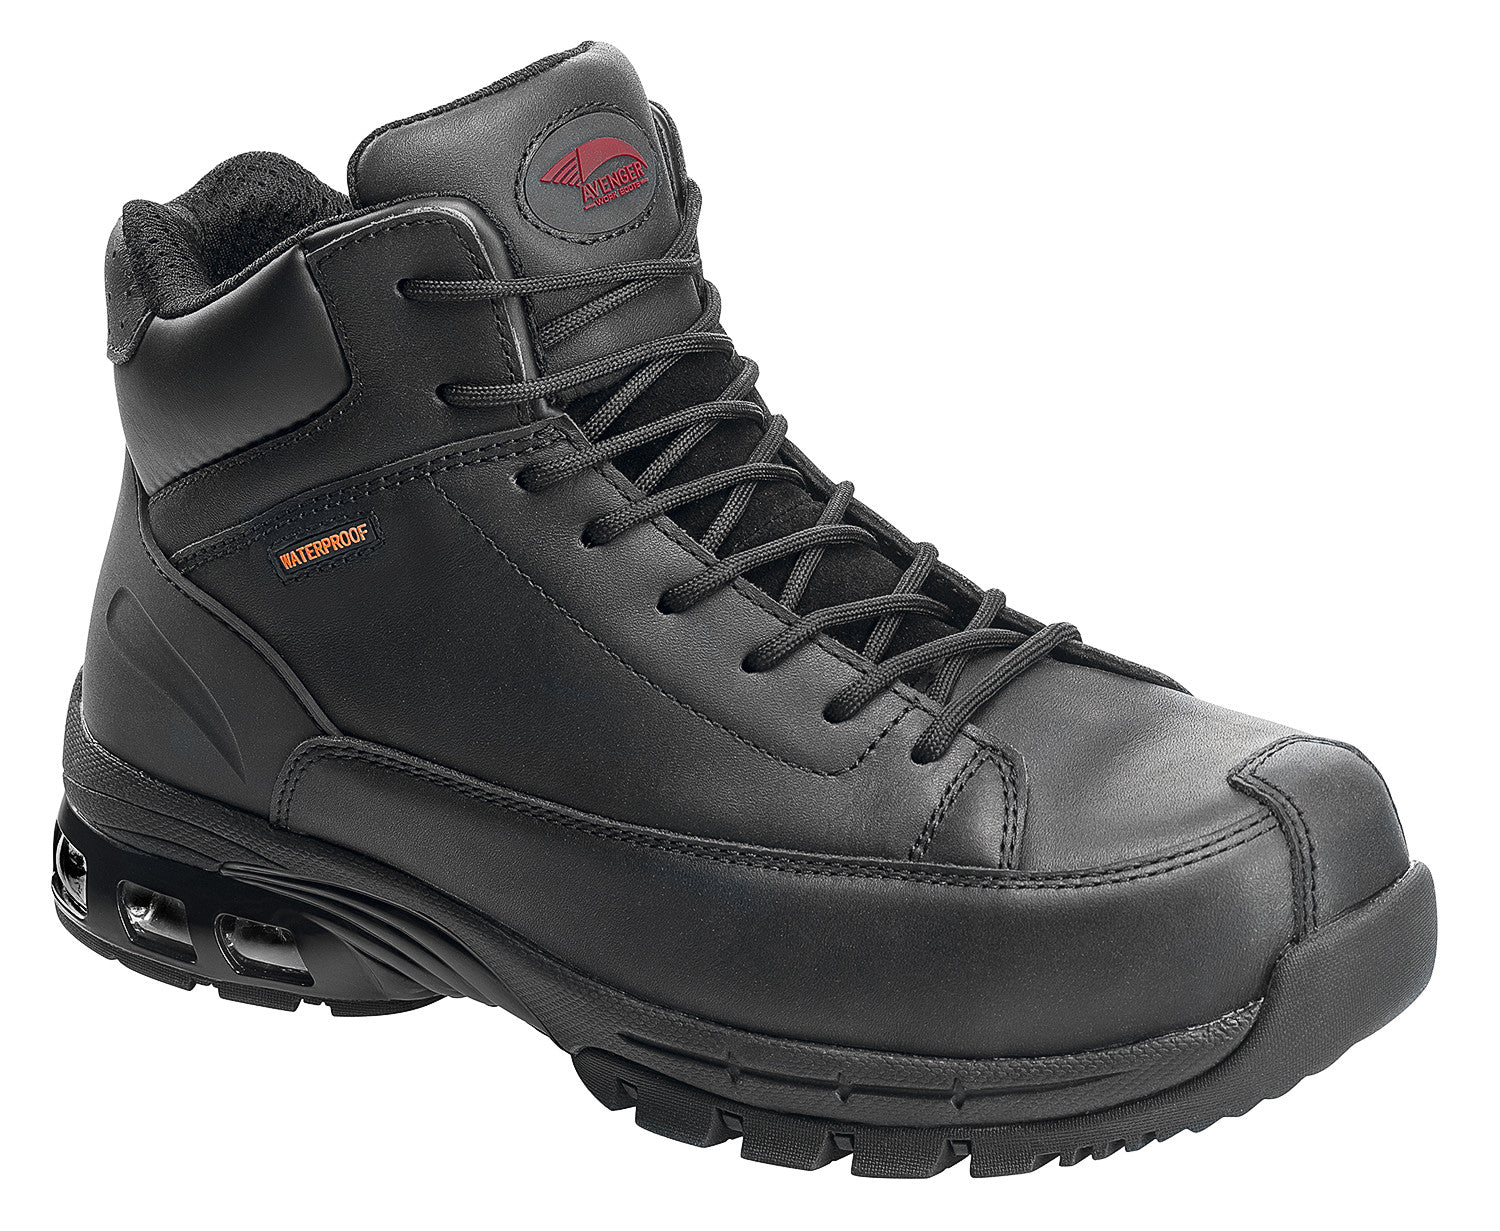 Waterproof  Comp Toe No Exposed Metal EH Boot with ABS Cushioning